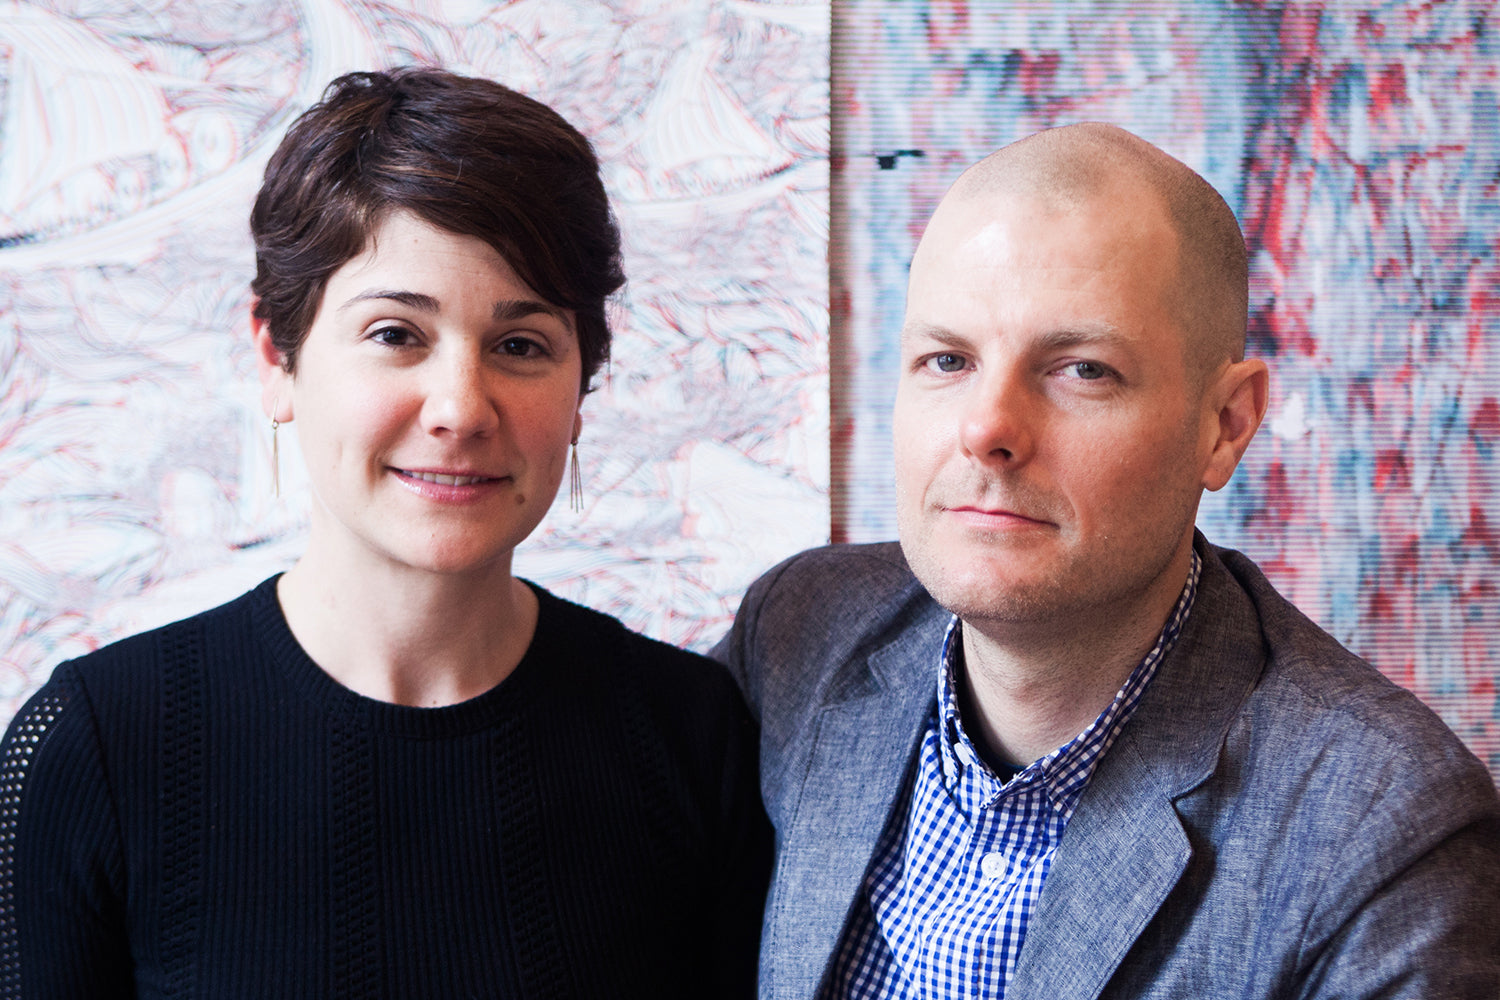 A bald man and a woman with a brunette pixie cut seated in front of a wall papered in two different graphic prints.